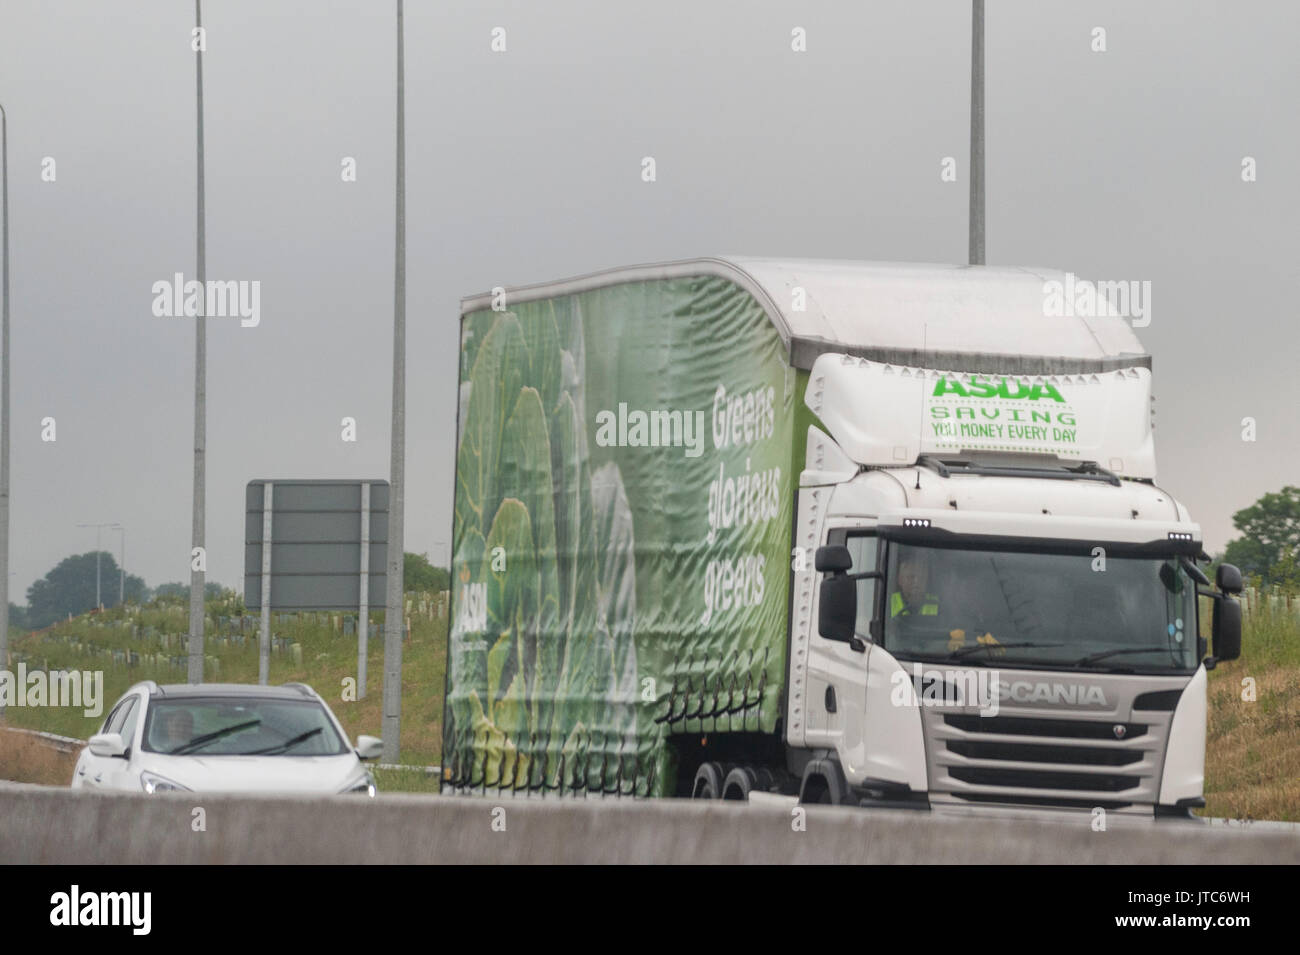 A Scania Asda deivery HGV Lorry driving on a main road in the Uk Stock Photo